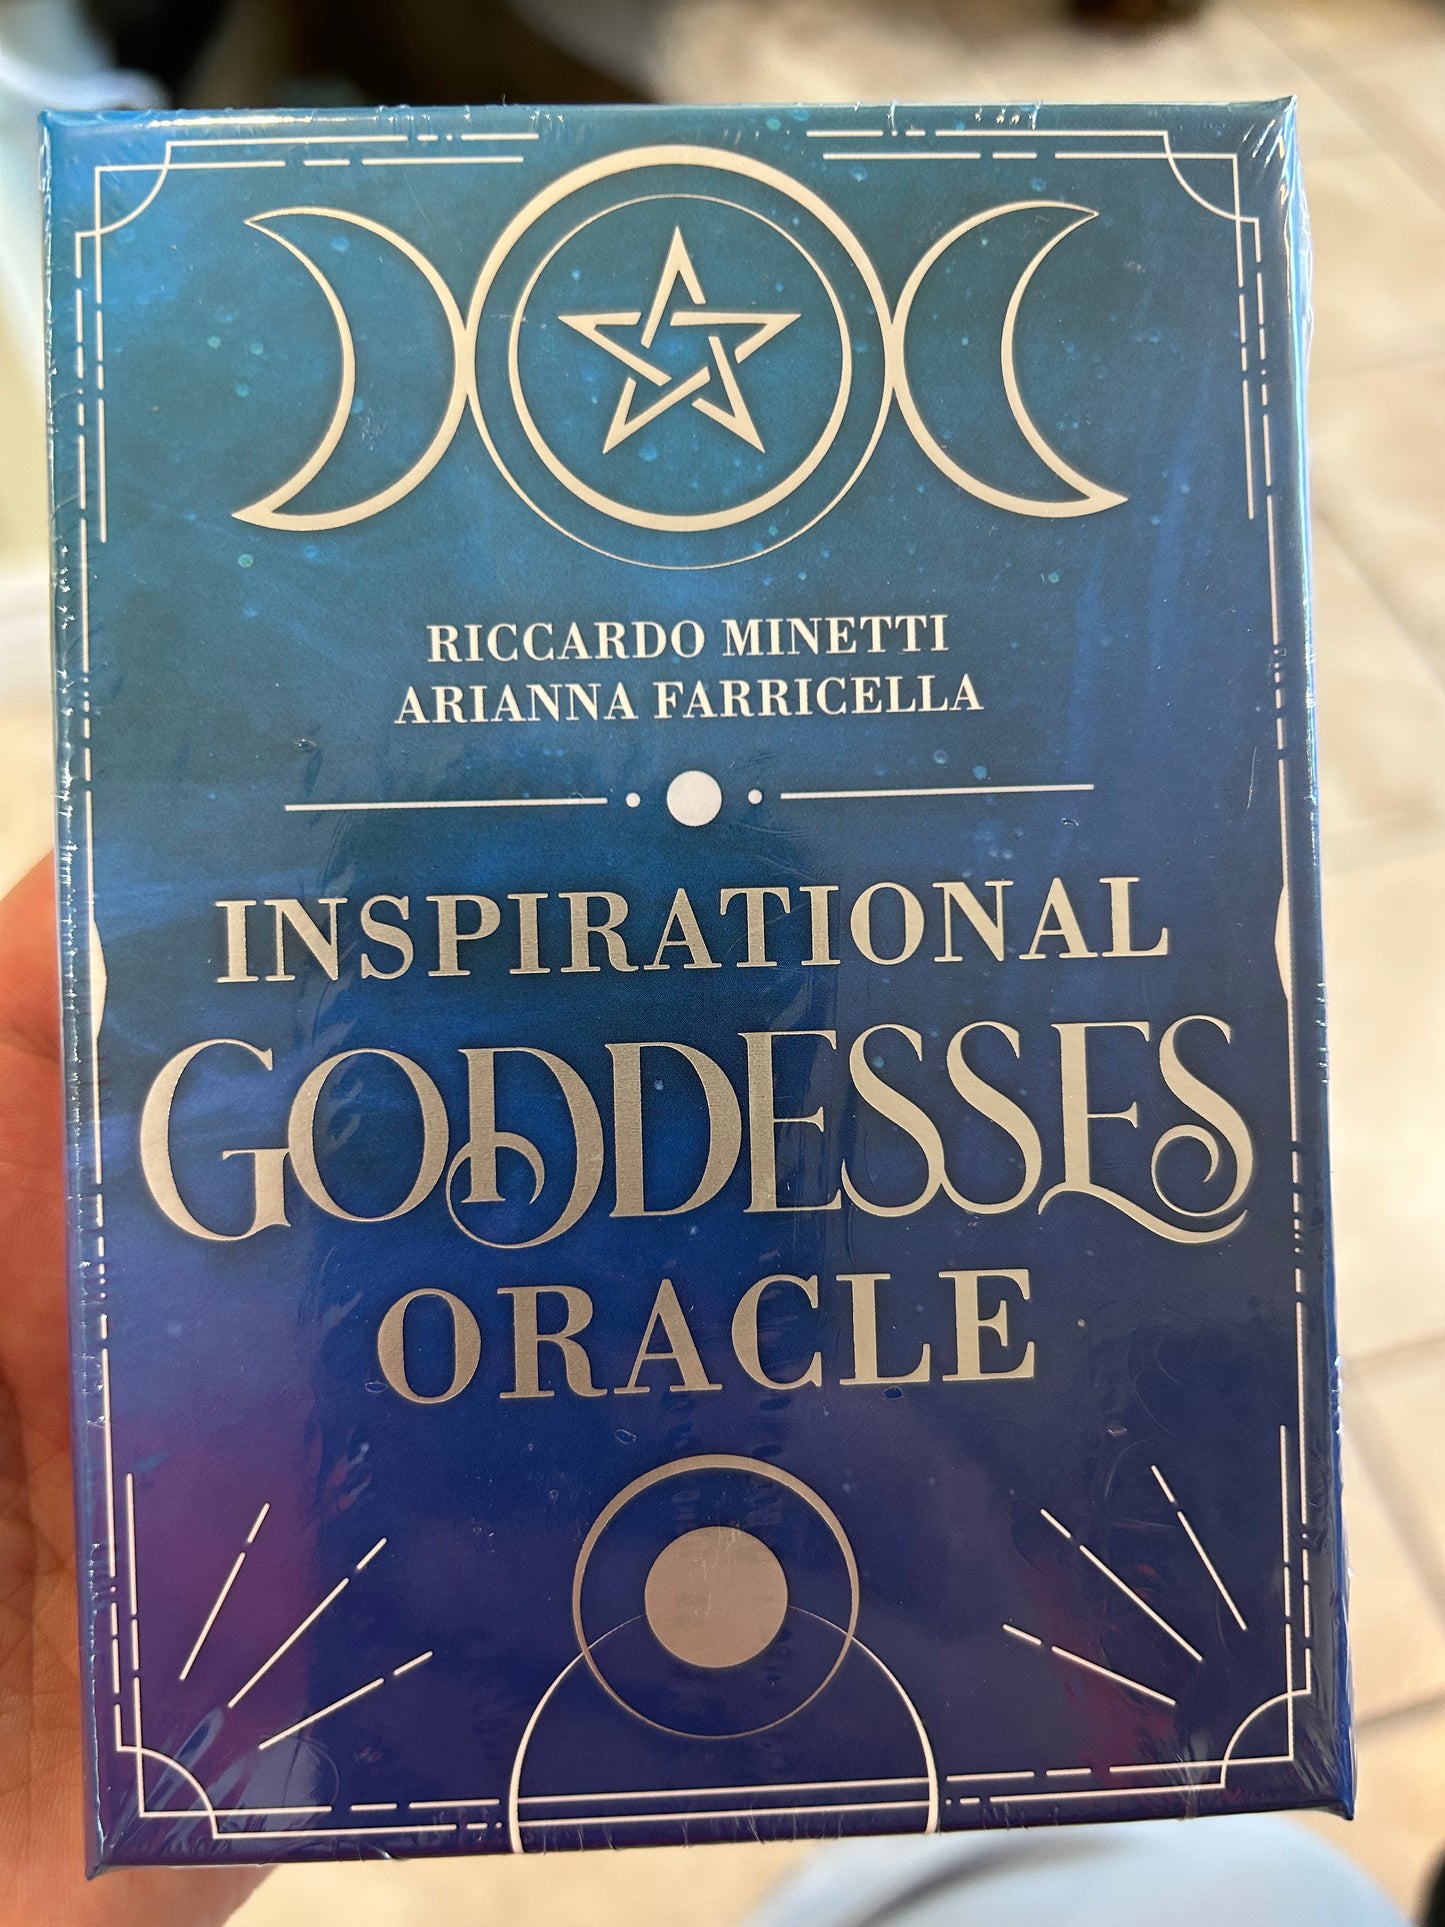 inspirational goddesses oracle deck by Riccardo Minetti and Arianna Farricella